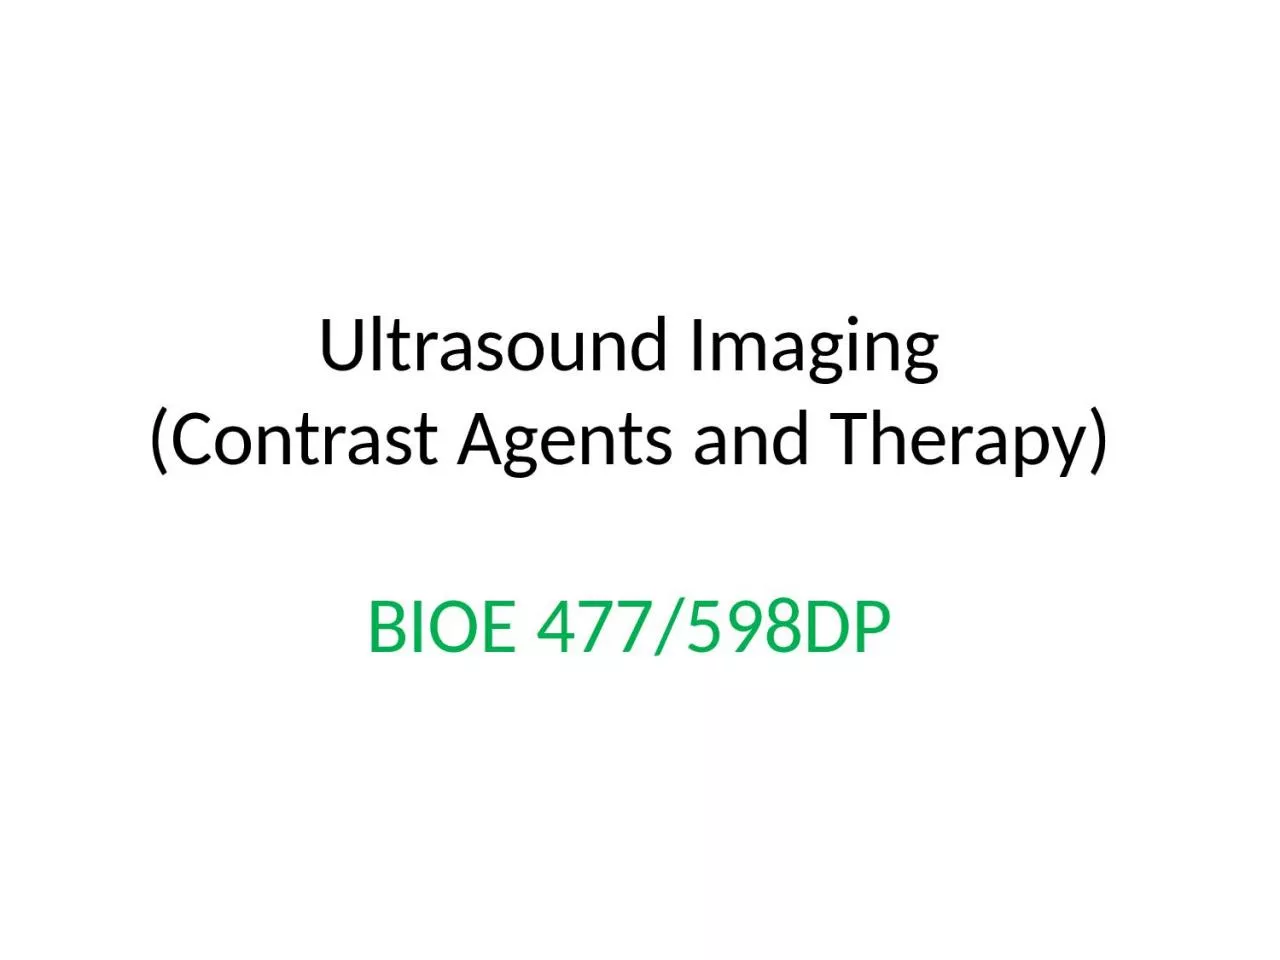 Ultrasound Imaging (Contrast Agents and Therapy)